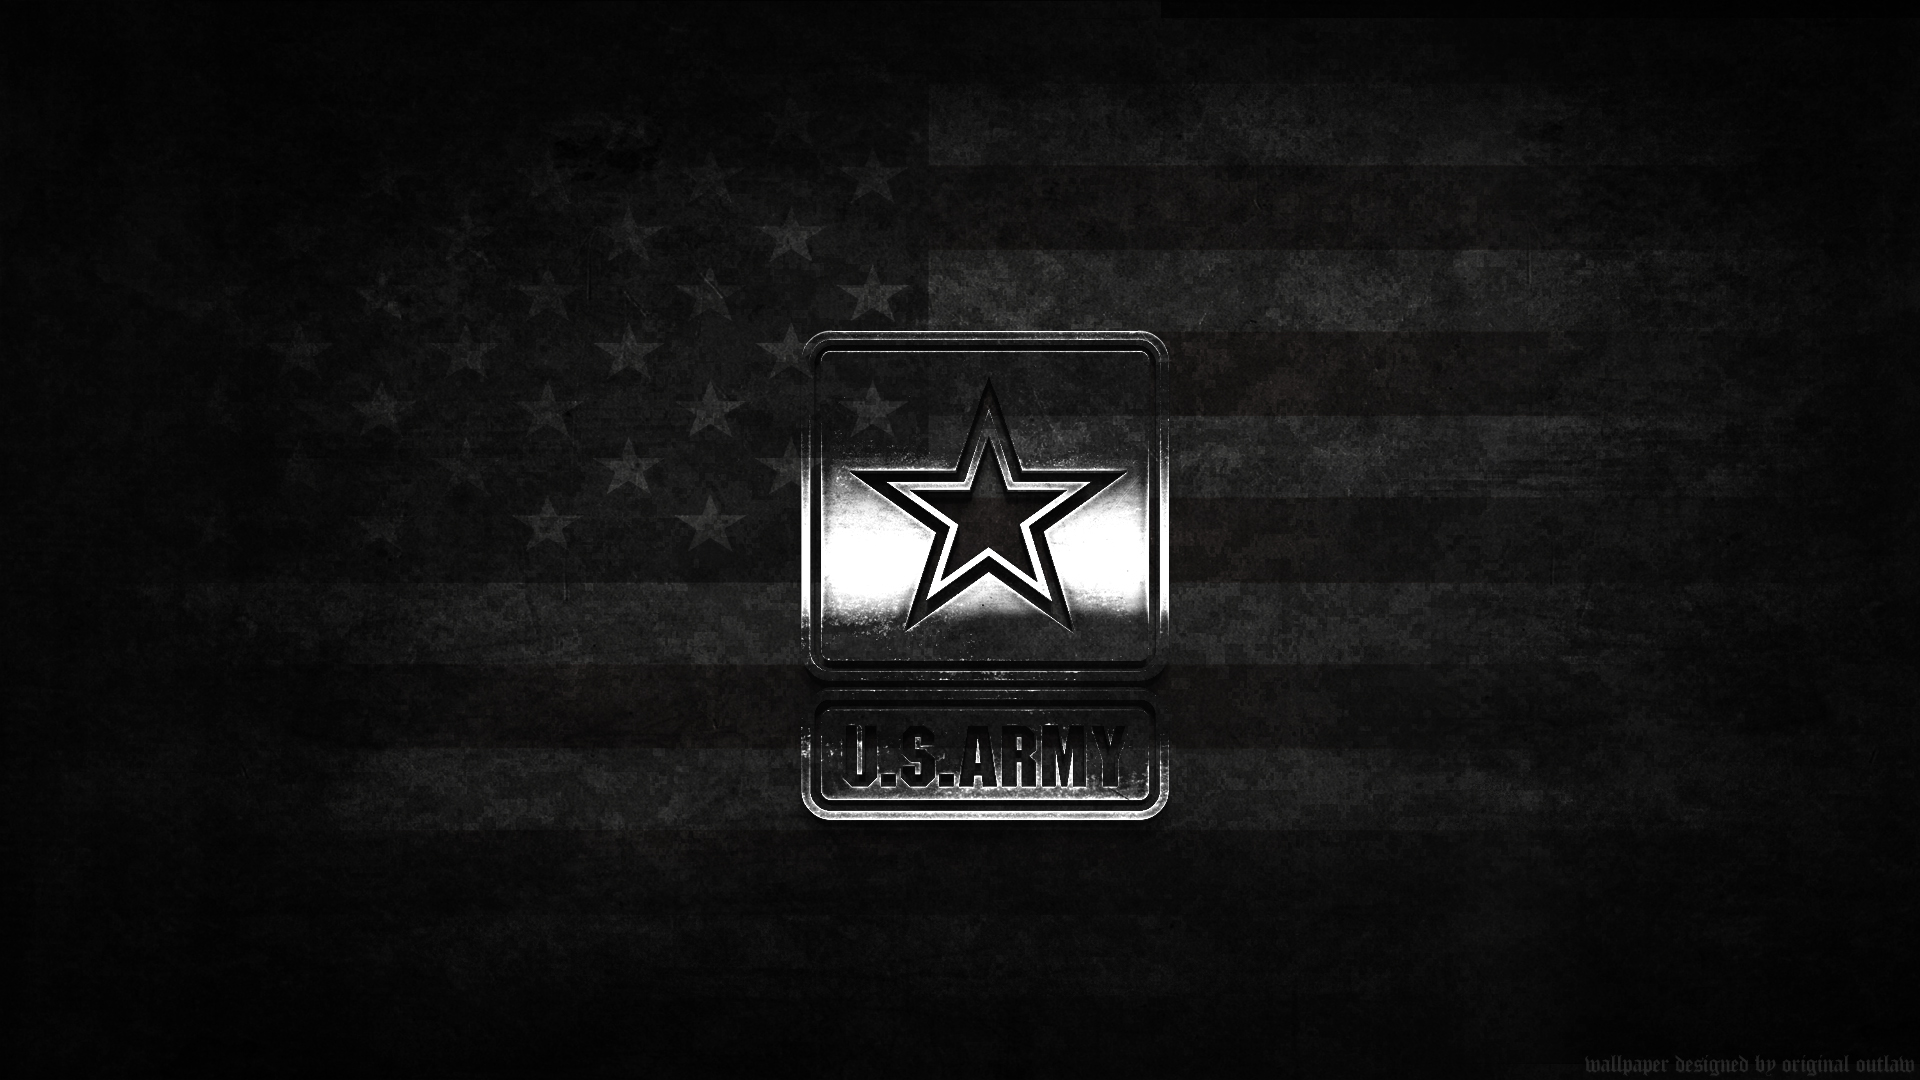 Us army wallpaper backgrounds